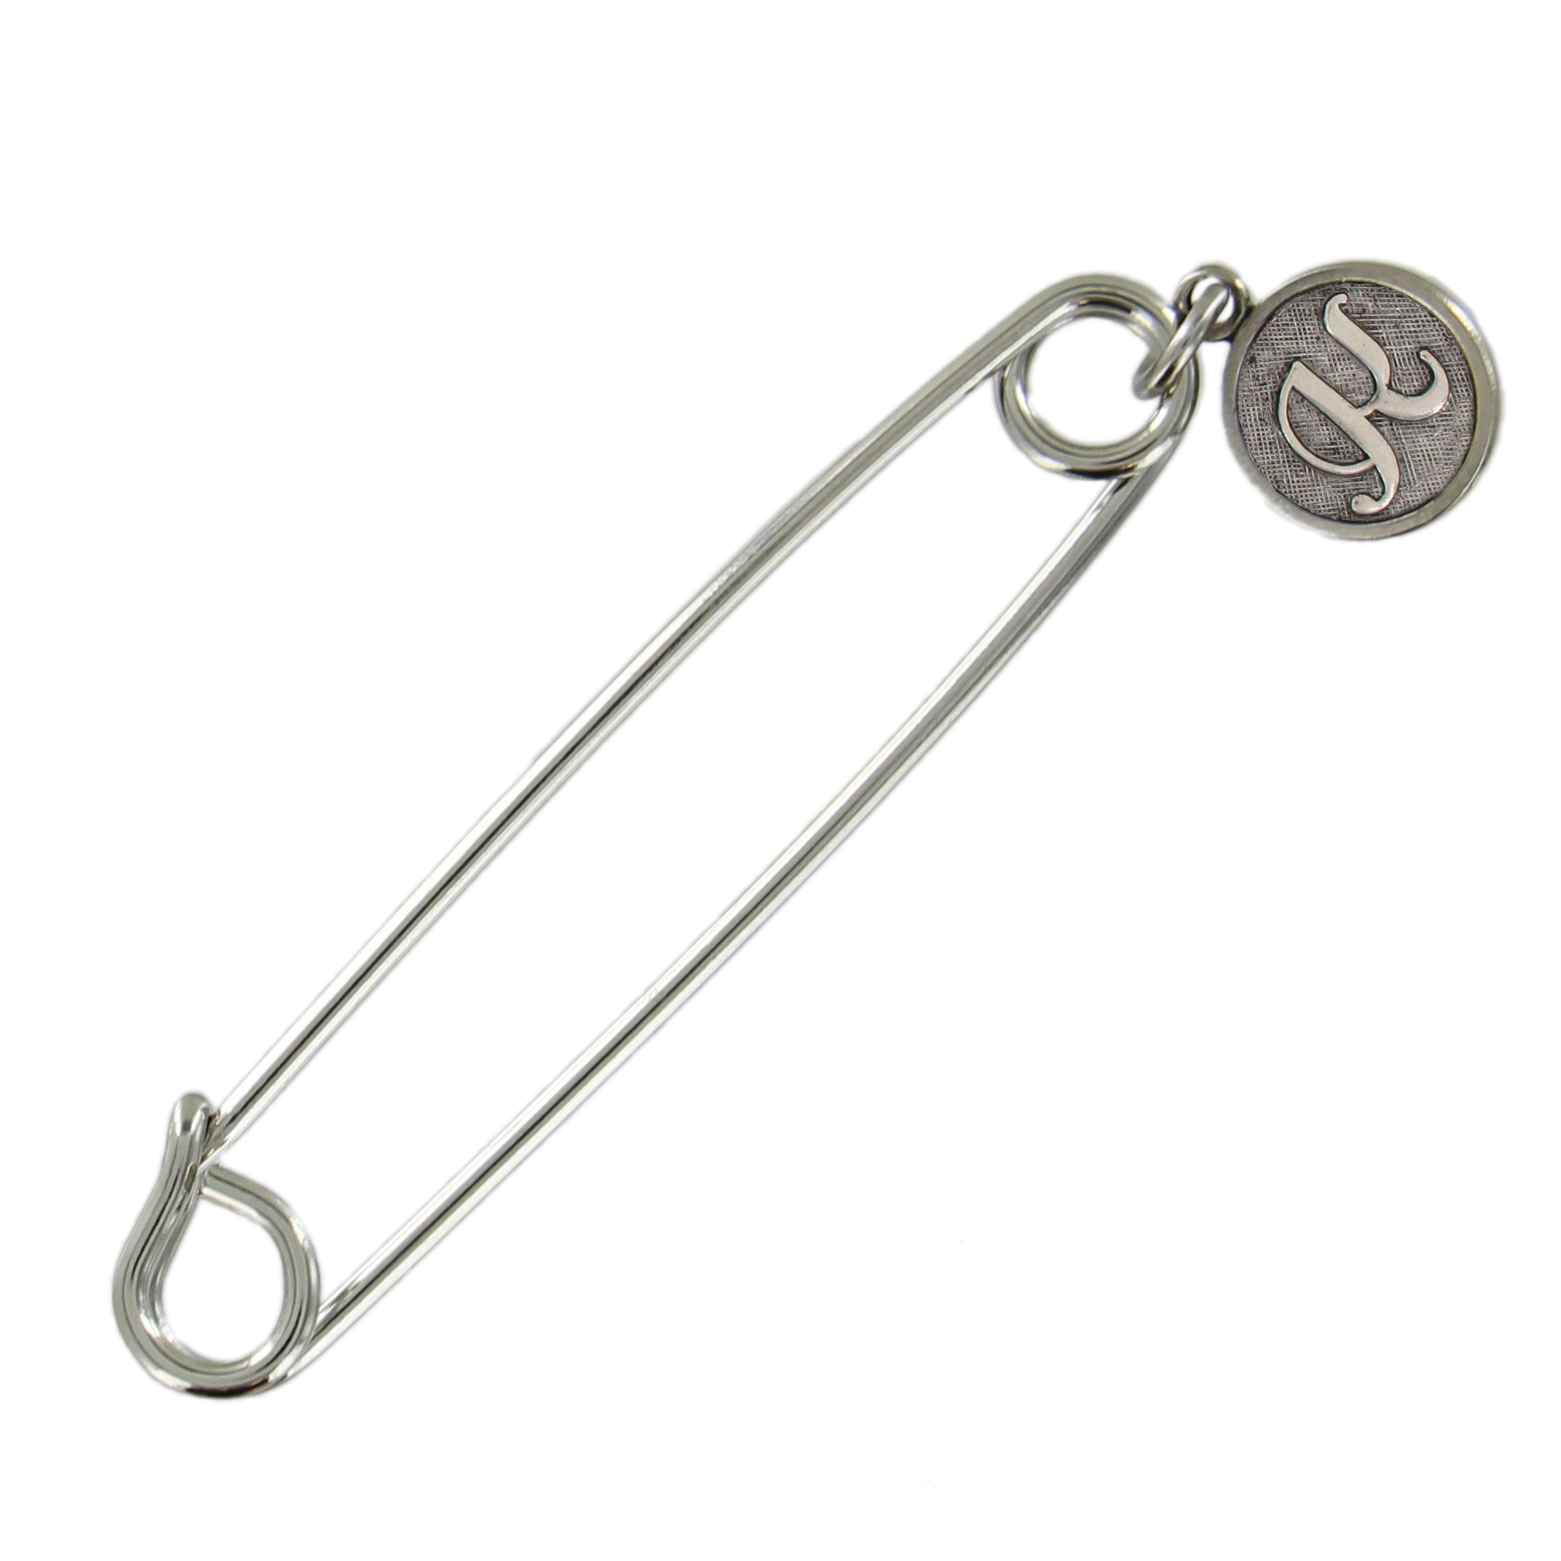 Safety Pin Brooch Silver Tone Cursive Initial Letter K End Charm USA Made 2